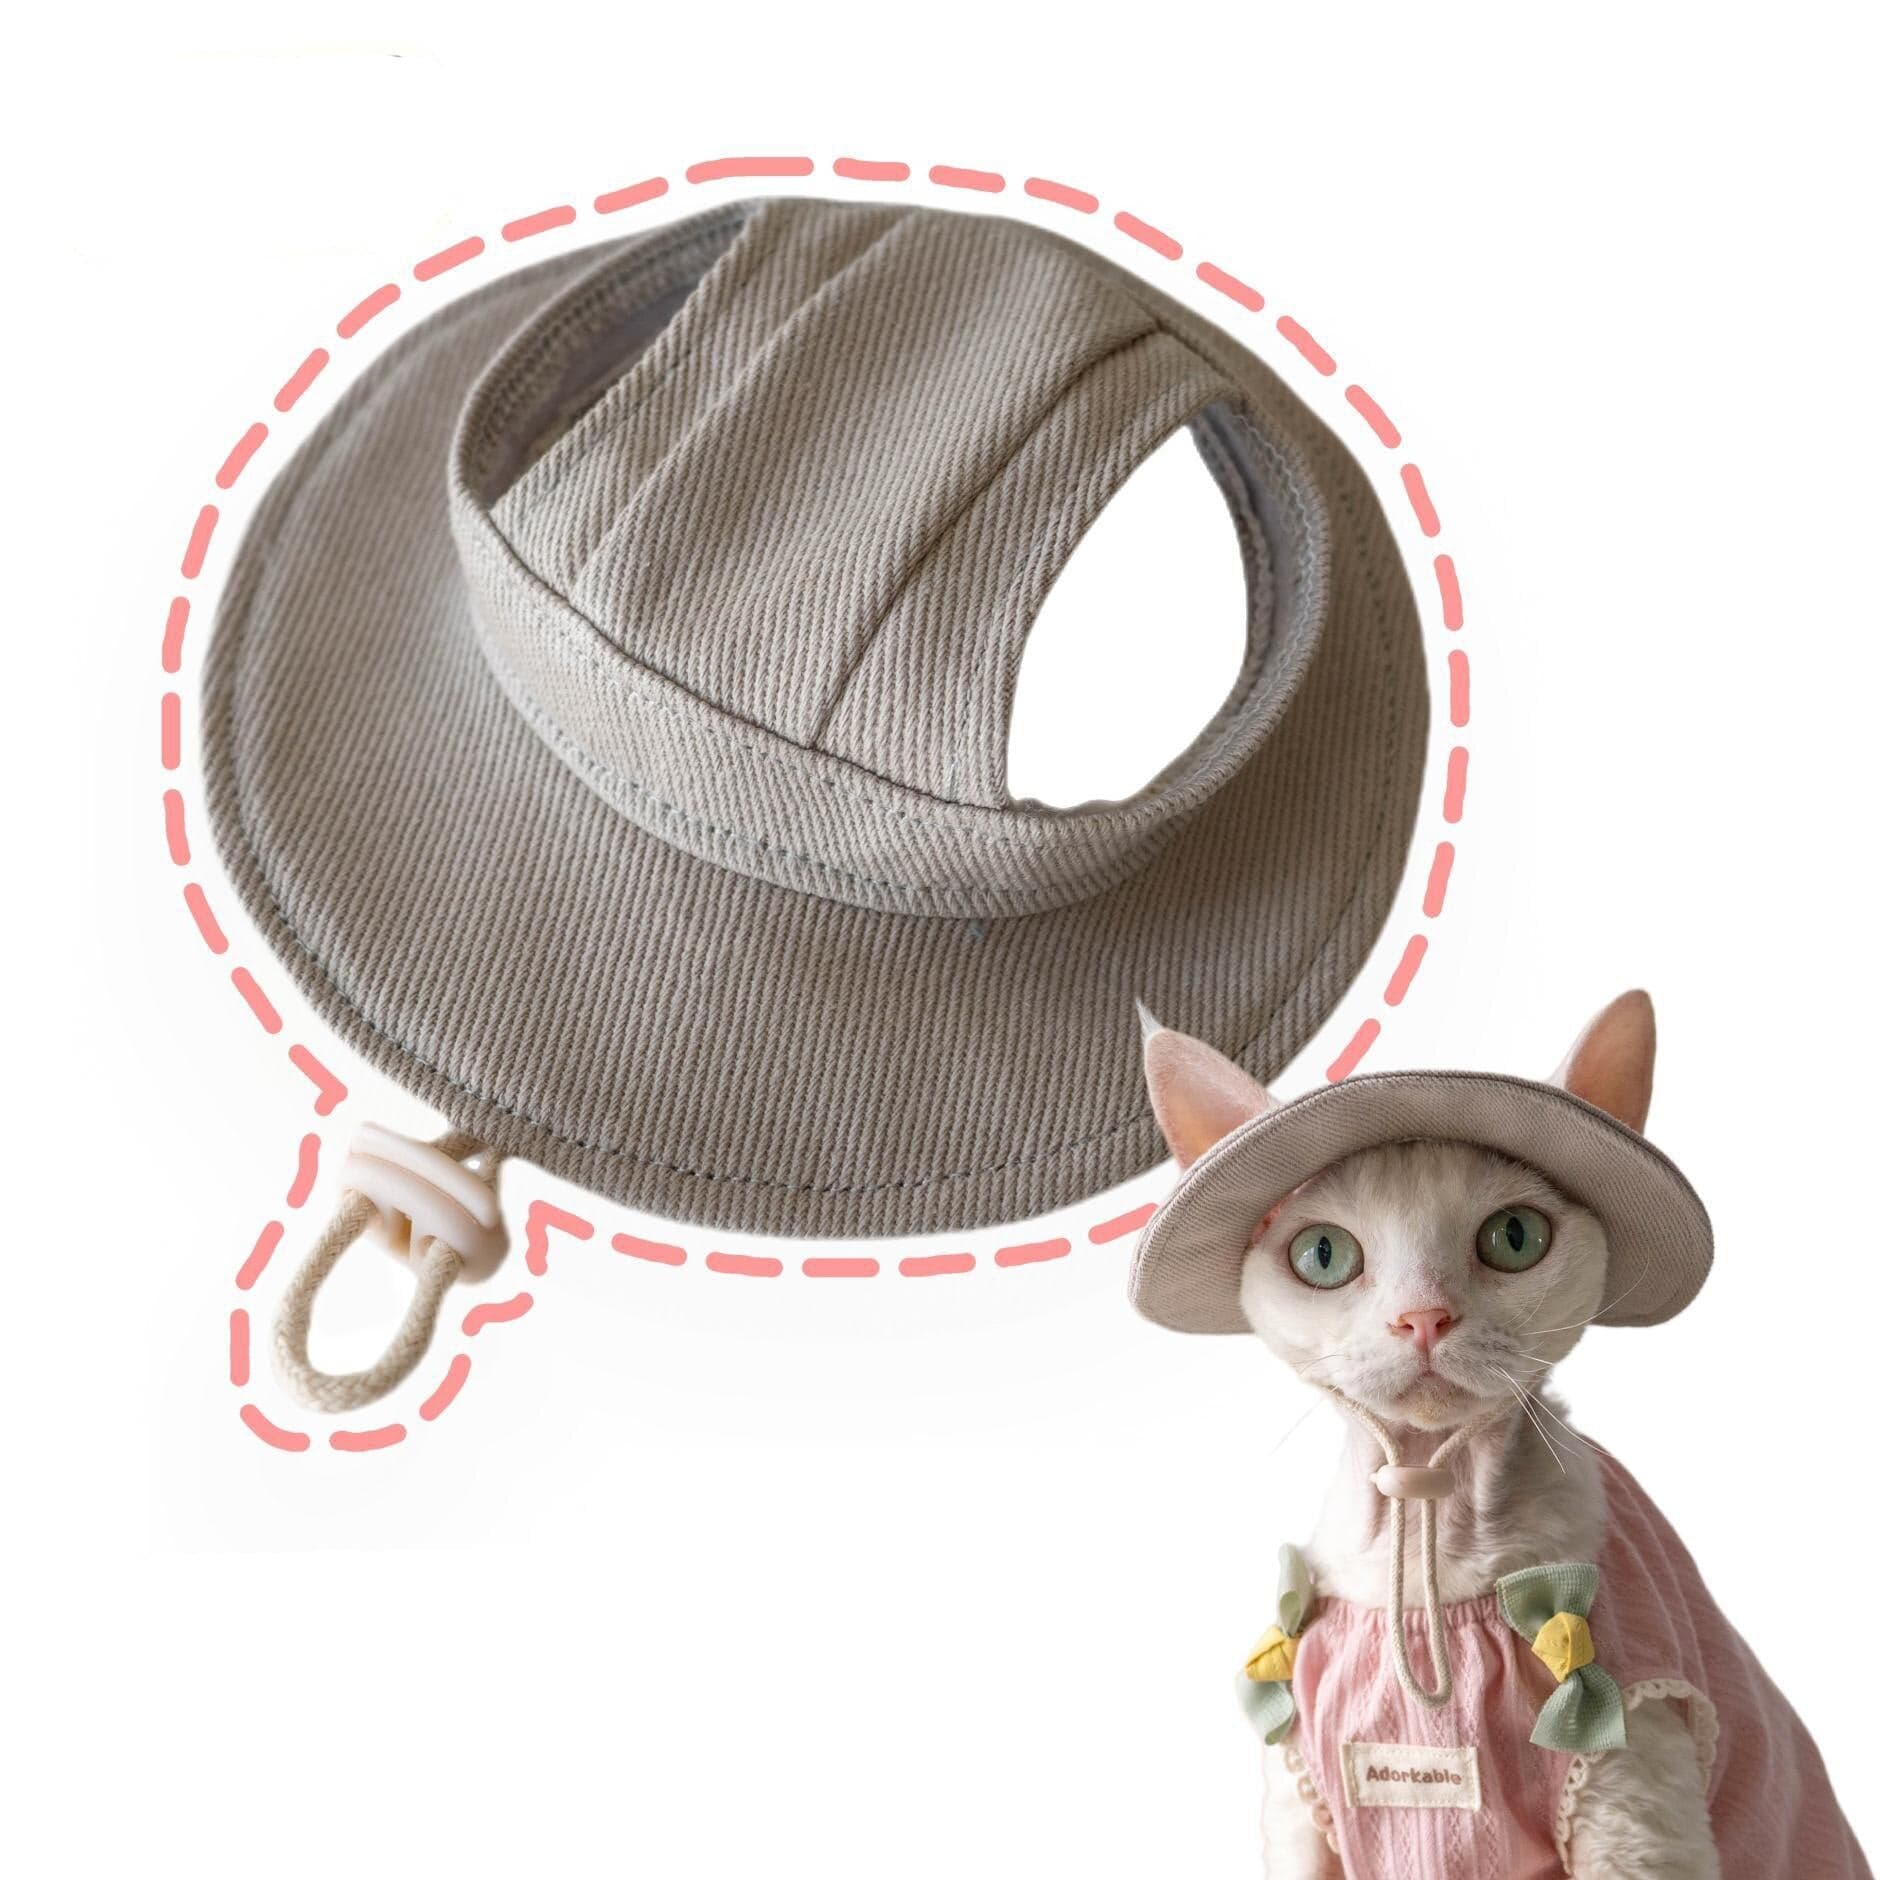 Adjustable travel cat hat with built-in sun protection